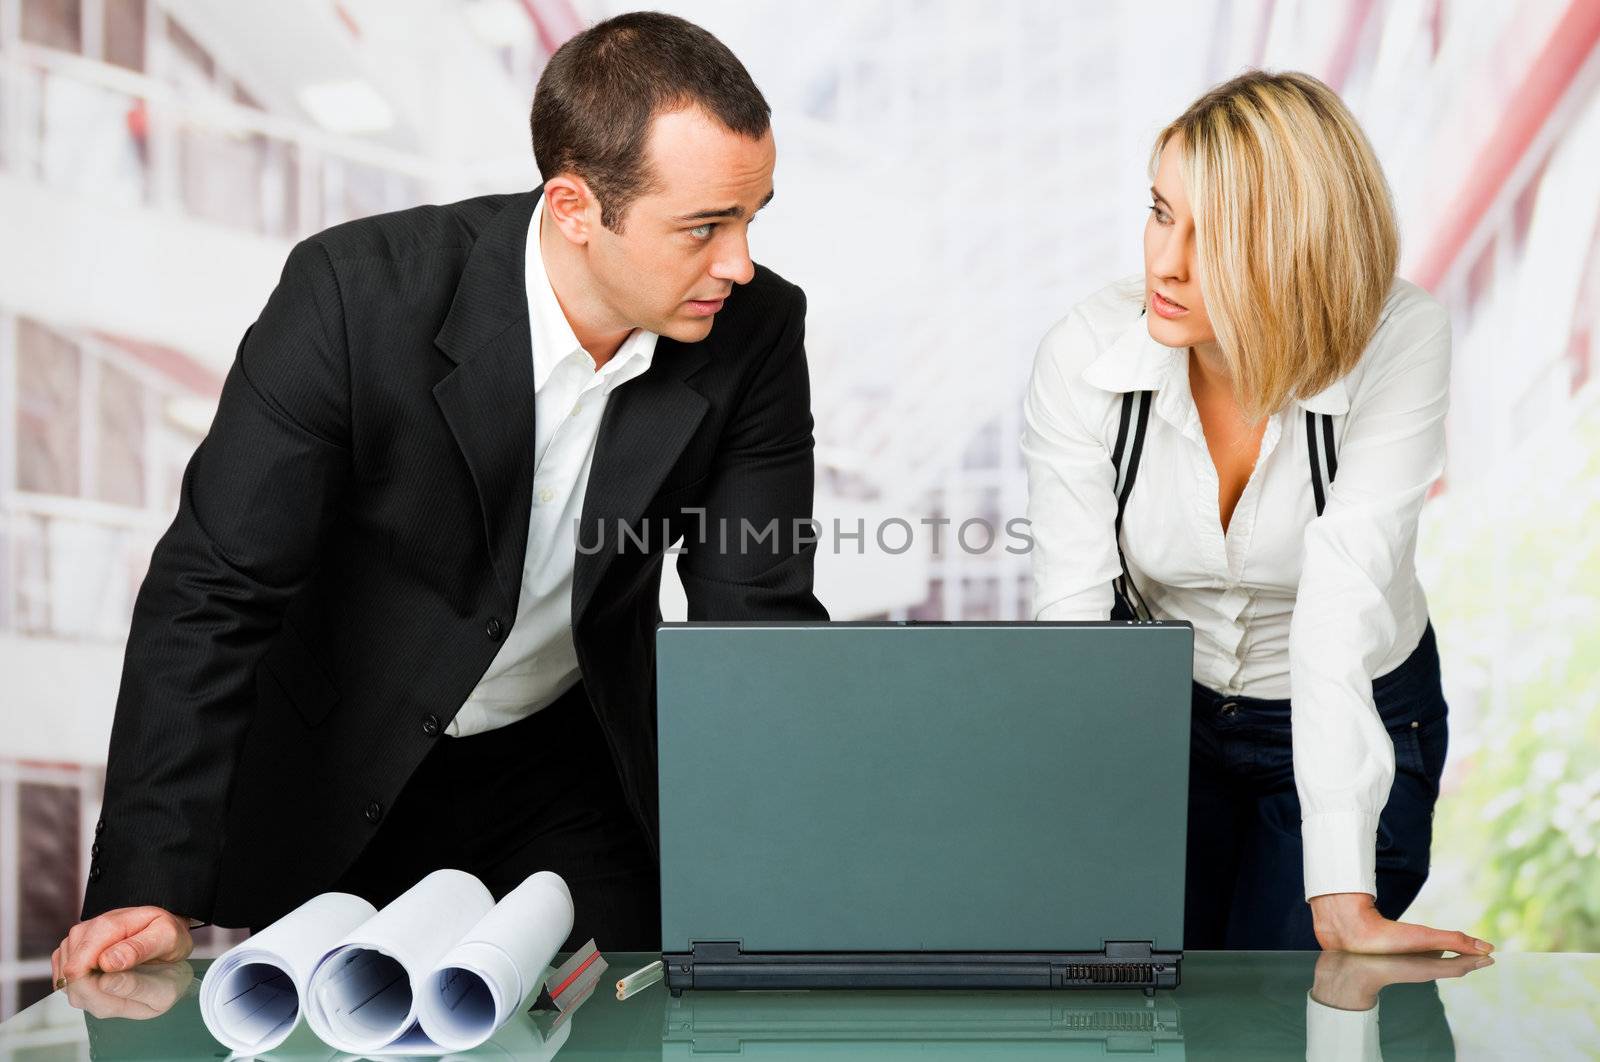 Male and female architects standing over laptop and blueprints, discussing